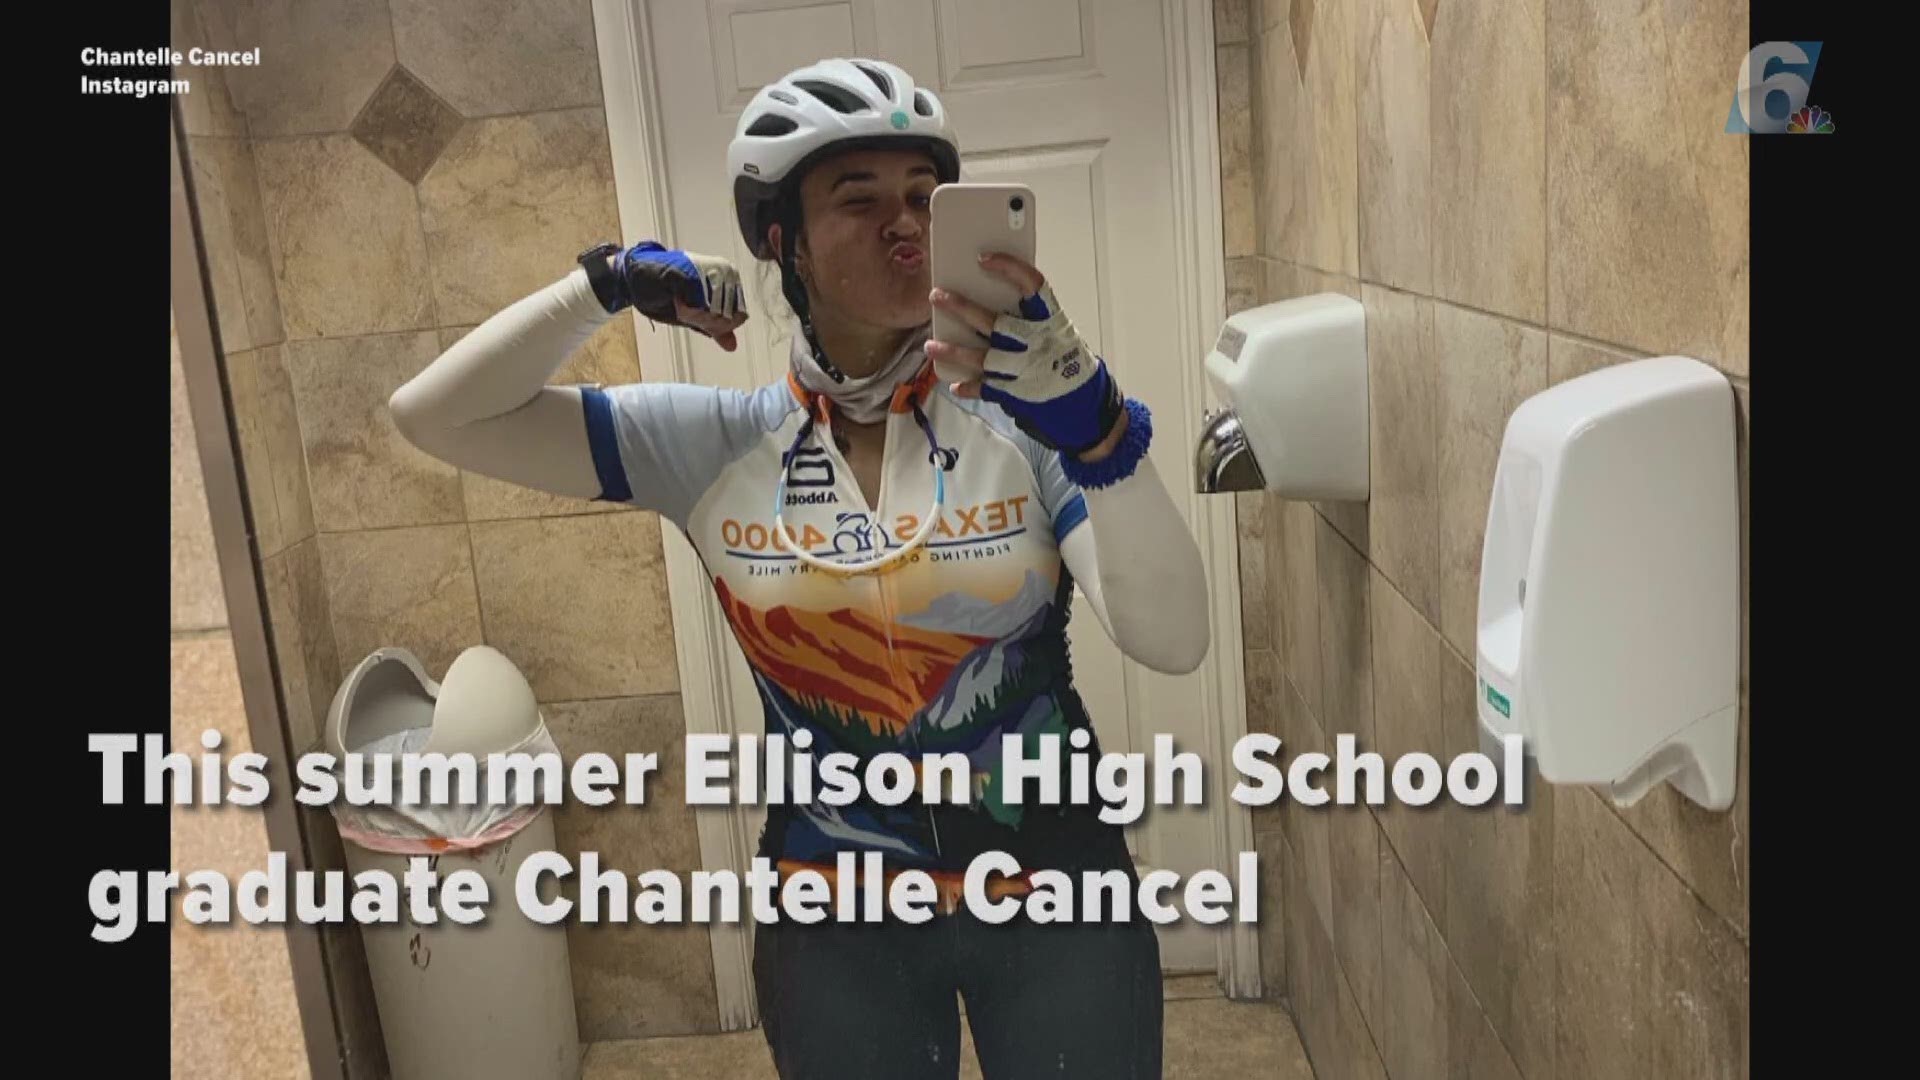 Chantelle Cancel said the ride is a chance to connect with those directly affected and to make a difference in their lives